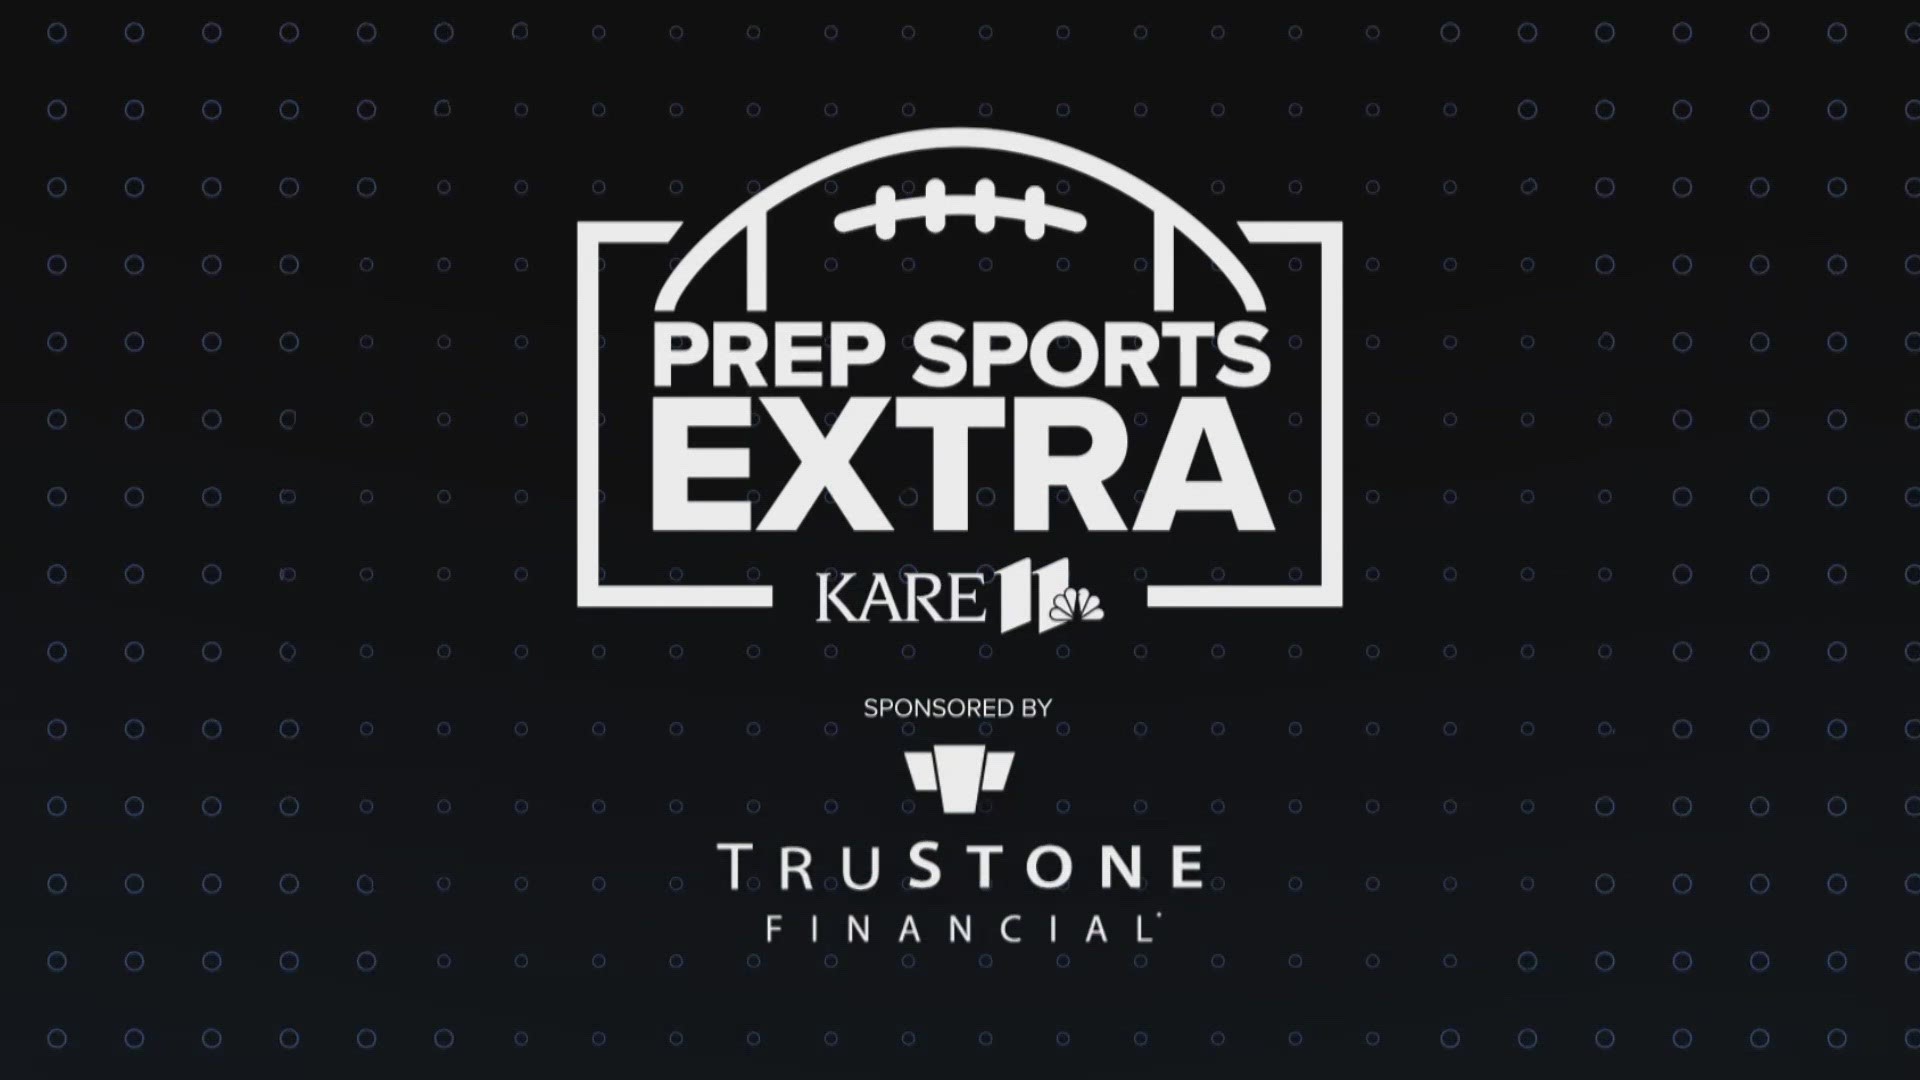 A special MEA-week edition of the Prep Sports Extra, where Randy Shaver will feature highlight's from Wednesday night's action.